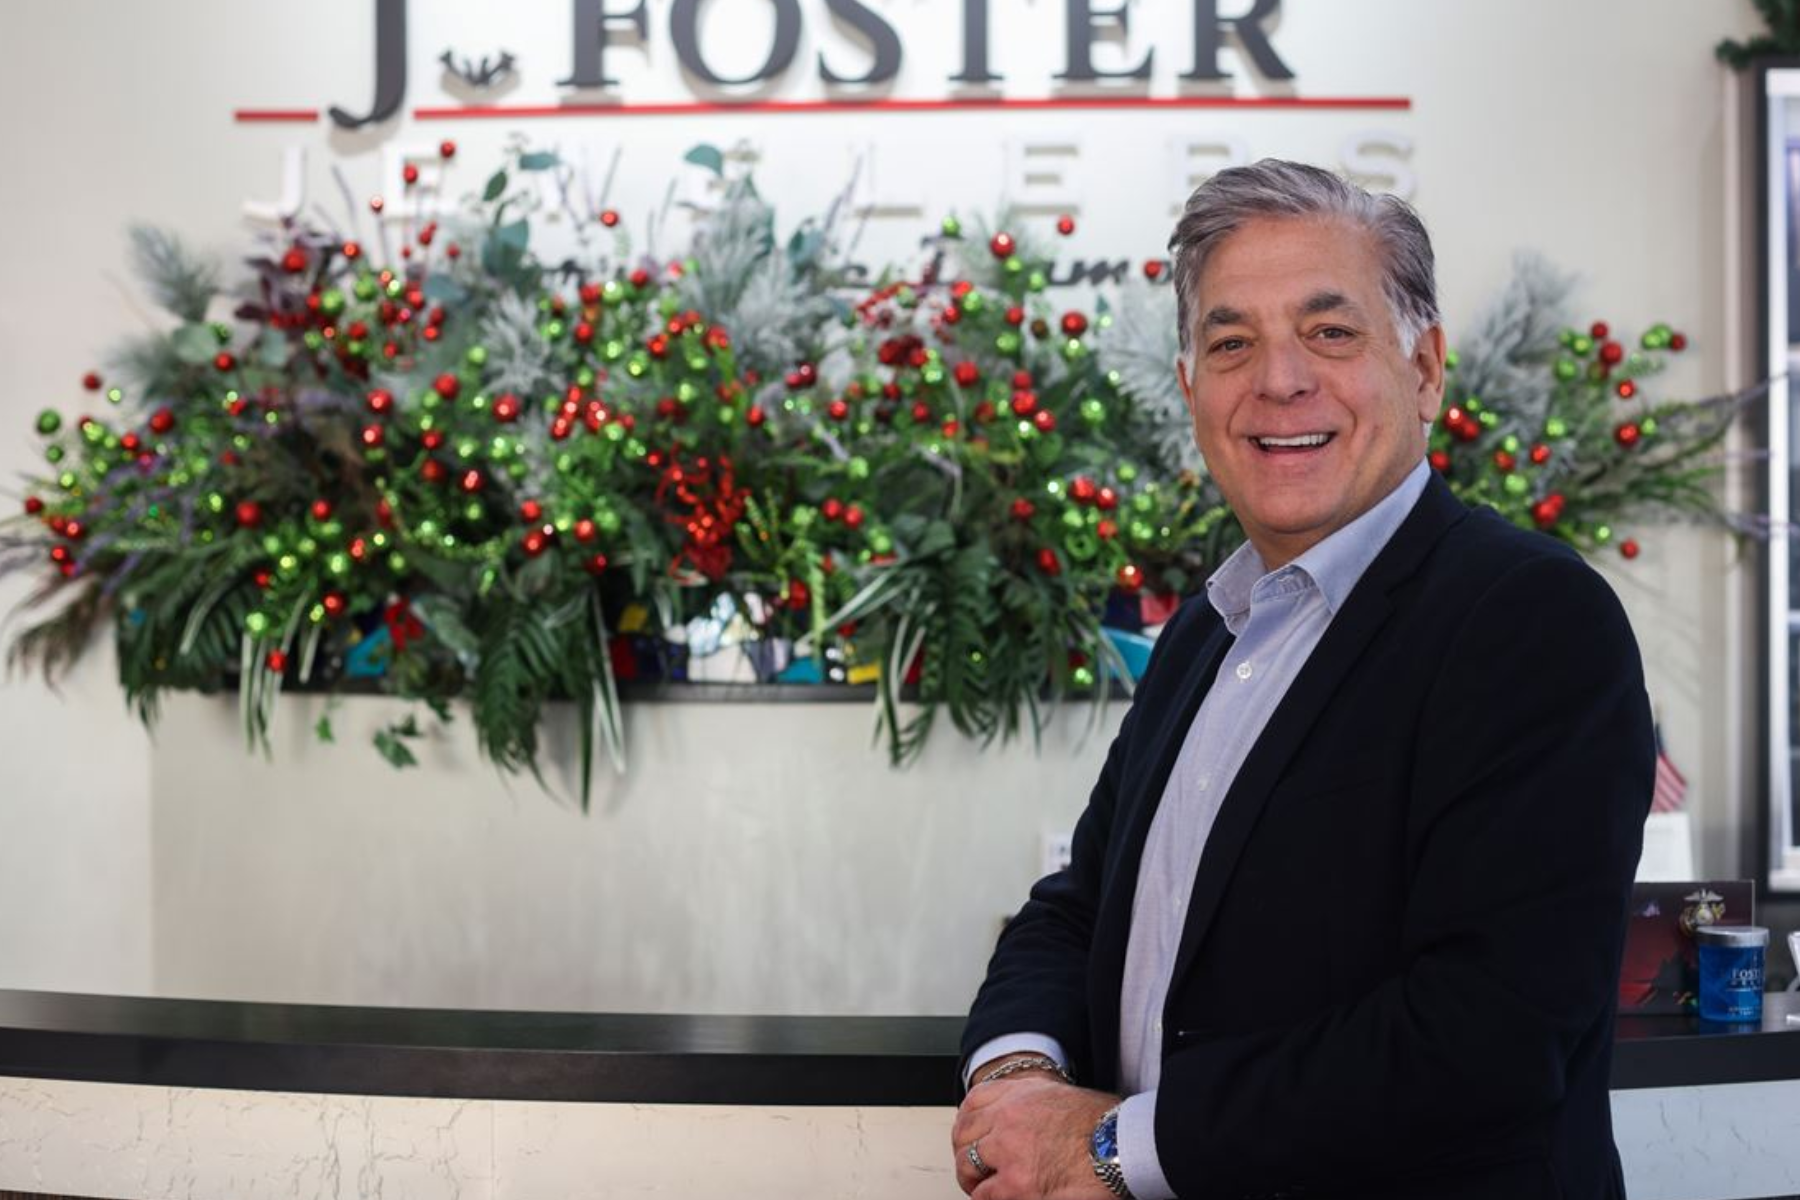 J. Foster Jewelers Pegs $300,000 Jewelry Giveaway To Snowy Christmas